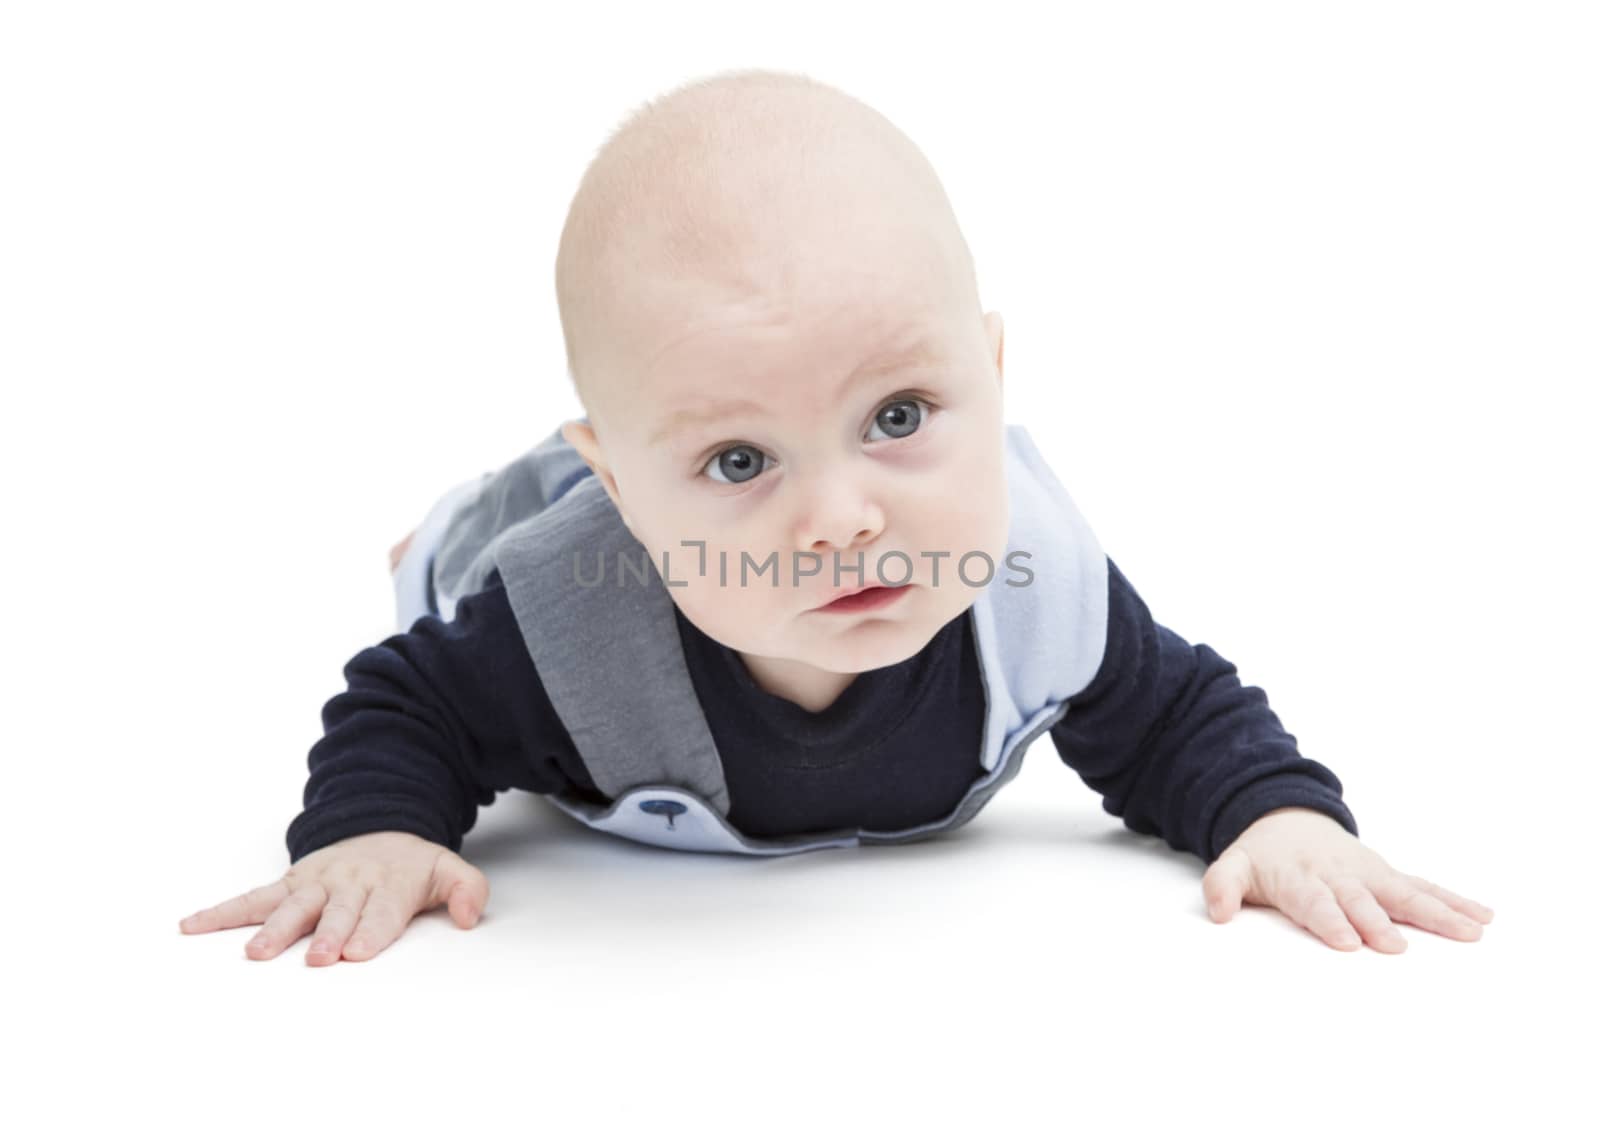 6 month old baby crawling on white floor. isolated on white background